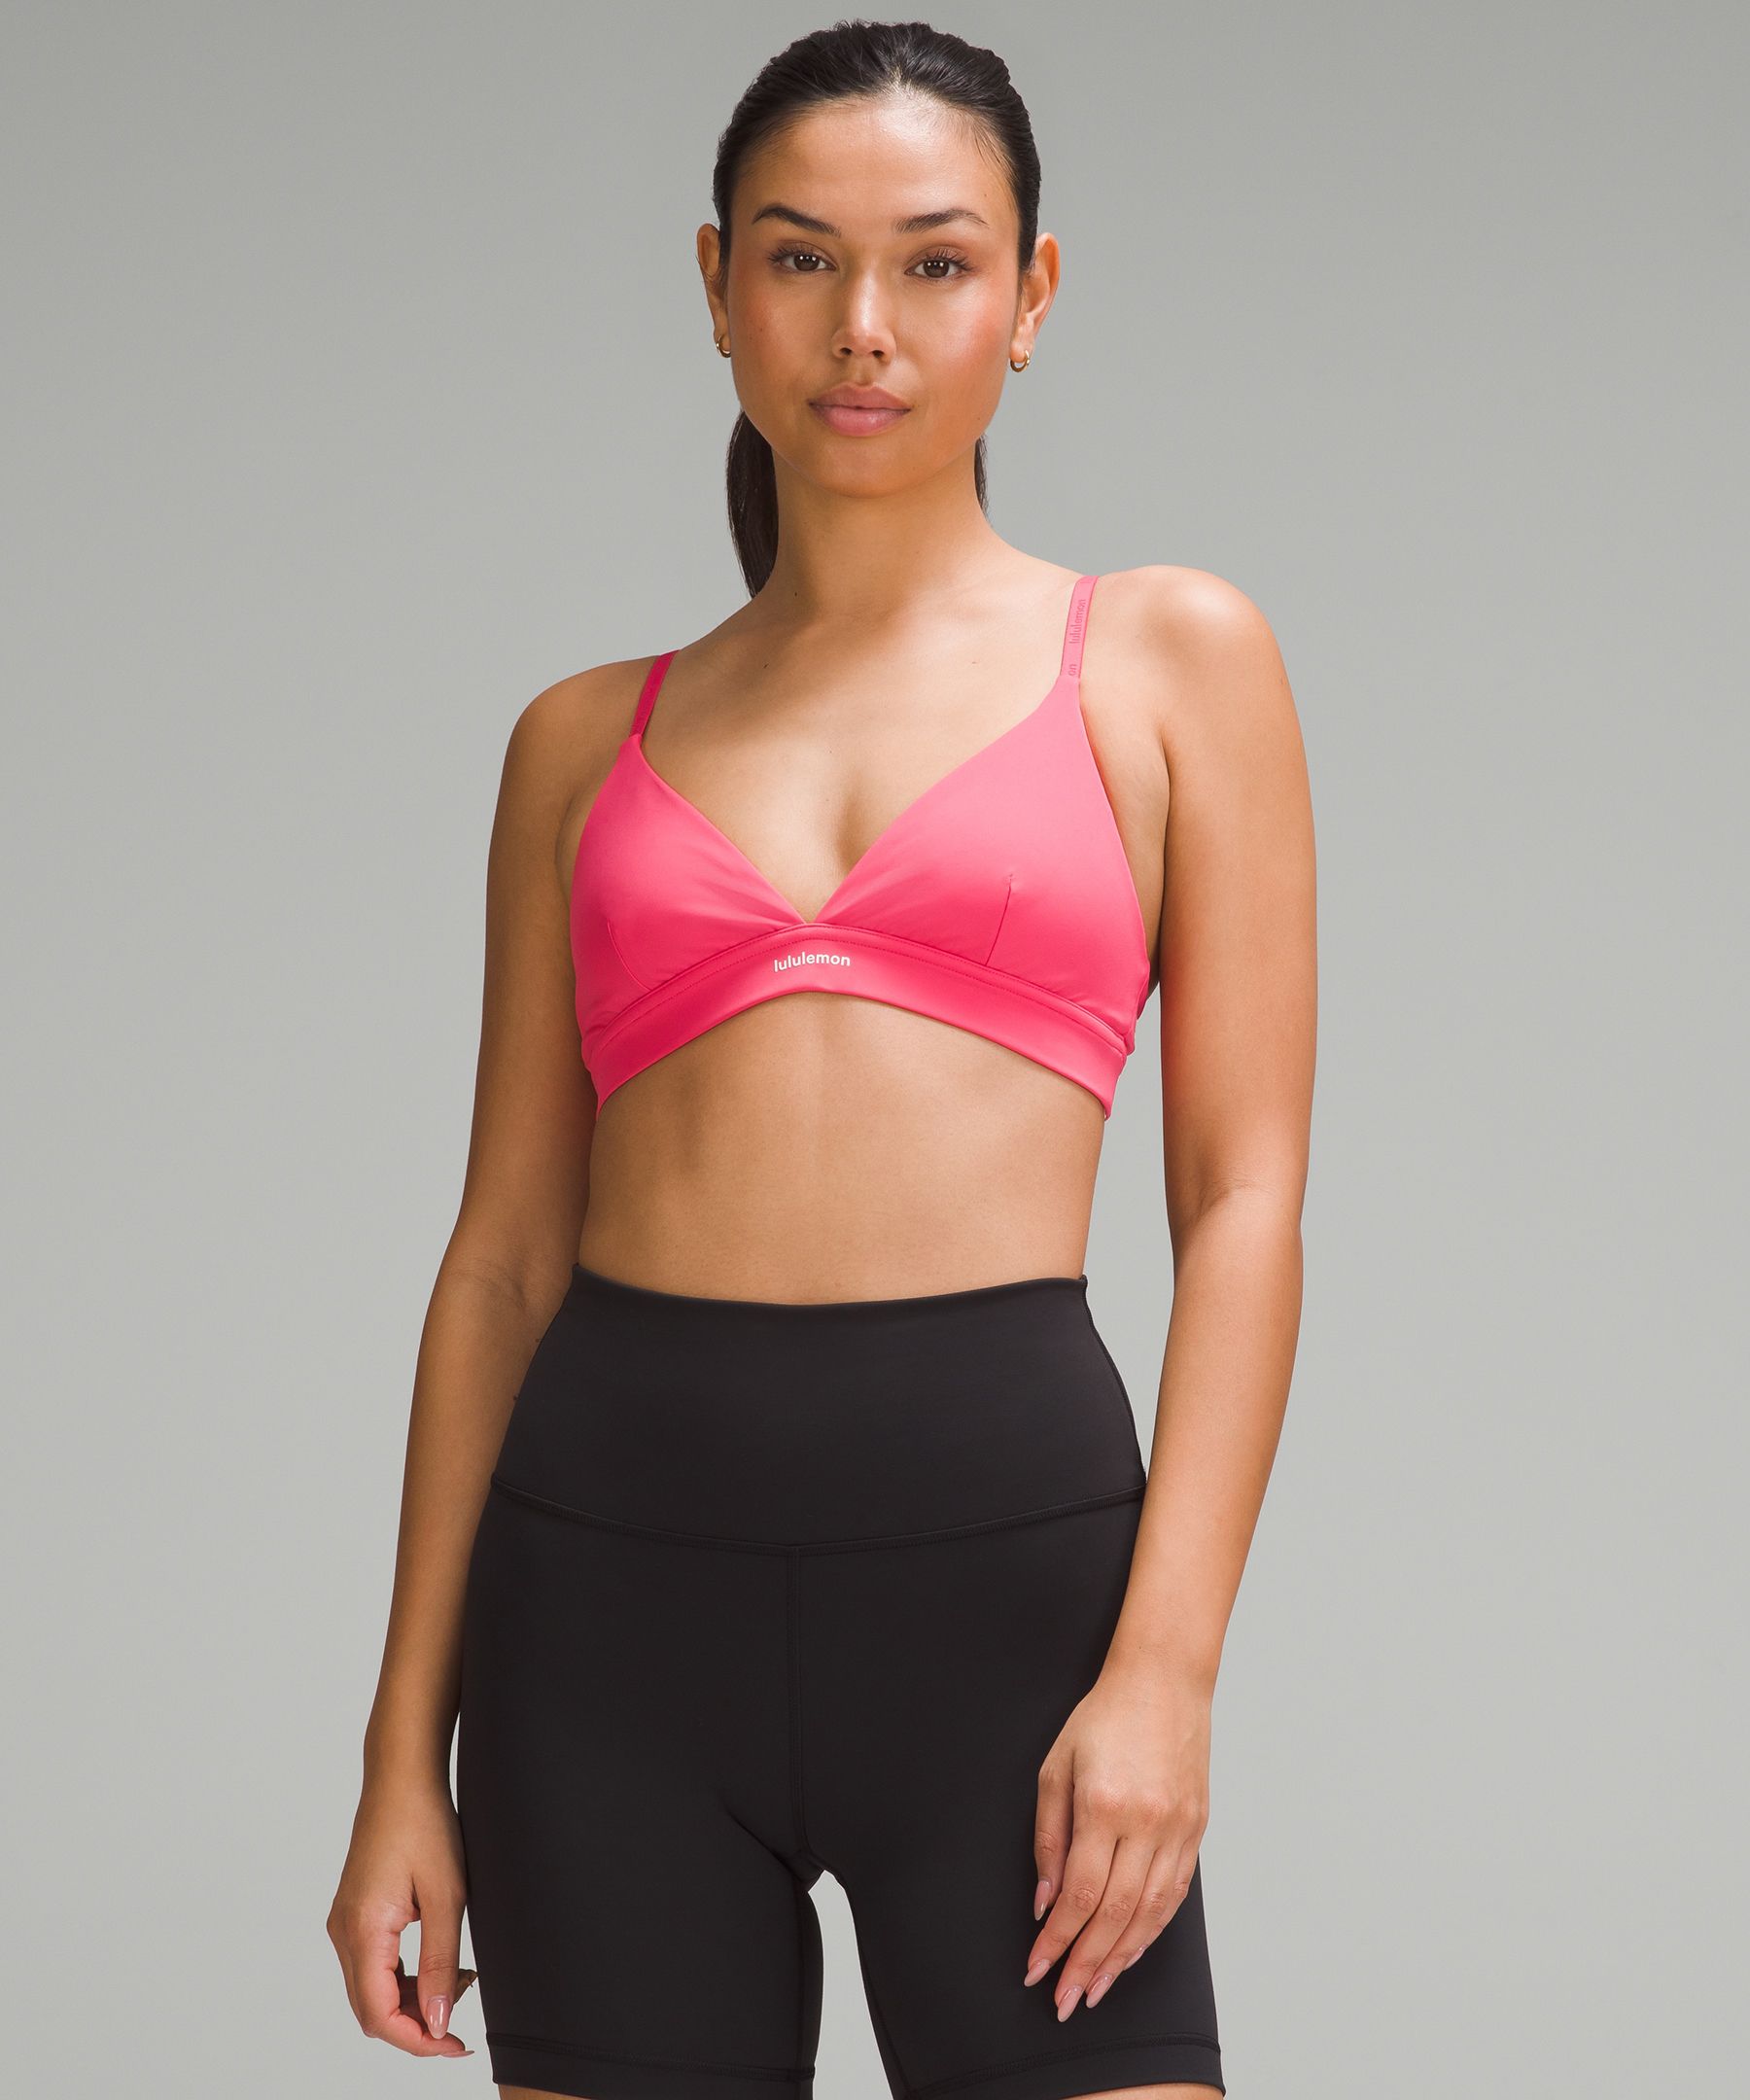 Lululemon pink free to be serene bra - $45 (13% Off Retail) - From Taylor